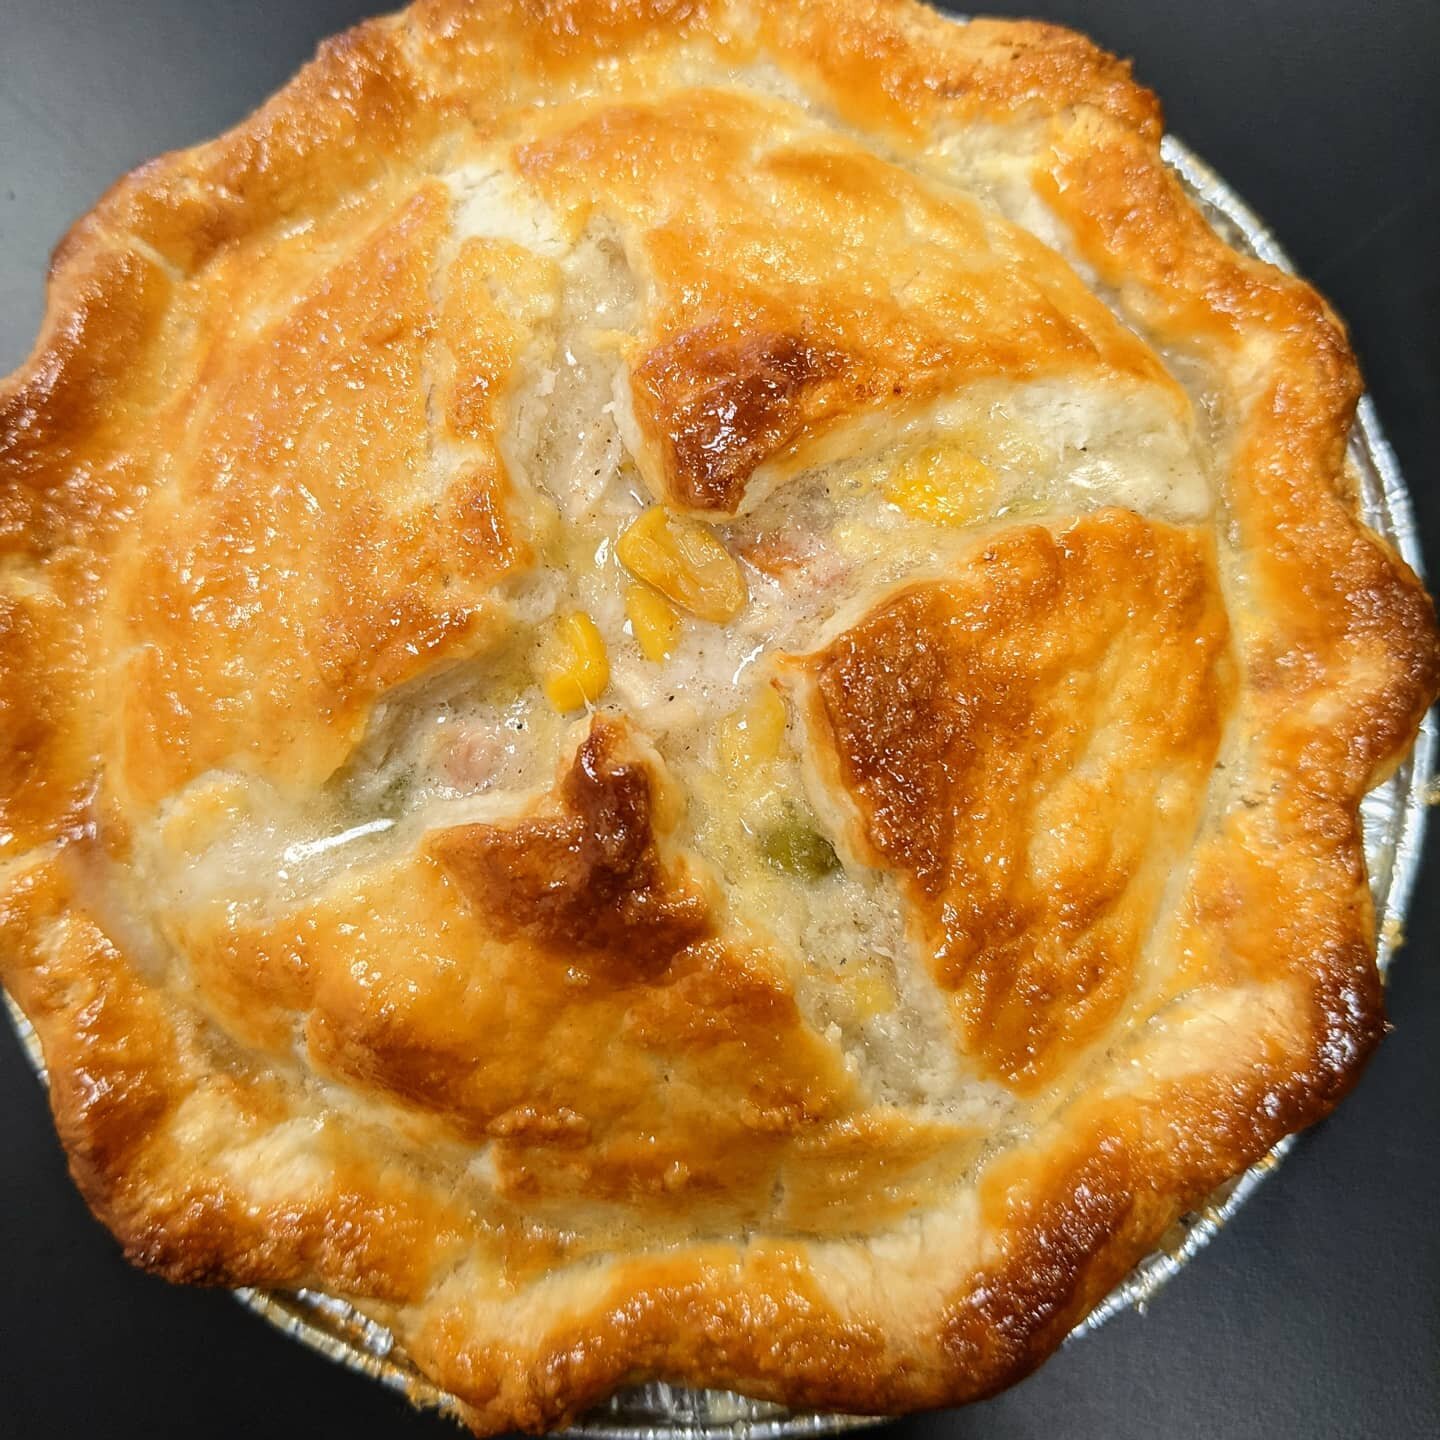 We're going to be serving up some new inventions as well as old favorites tomorrow night at #artown for their Friday Night Music Series at Rancho San Rafael!
.
We hope you'll come say hi and grab a pie!
.
.
#foodtruck #potpie #empanadas #comfortfood 